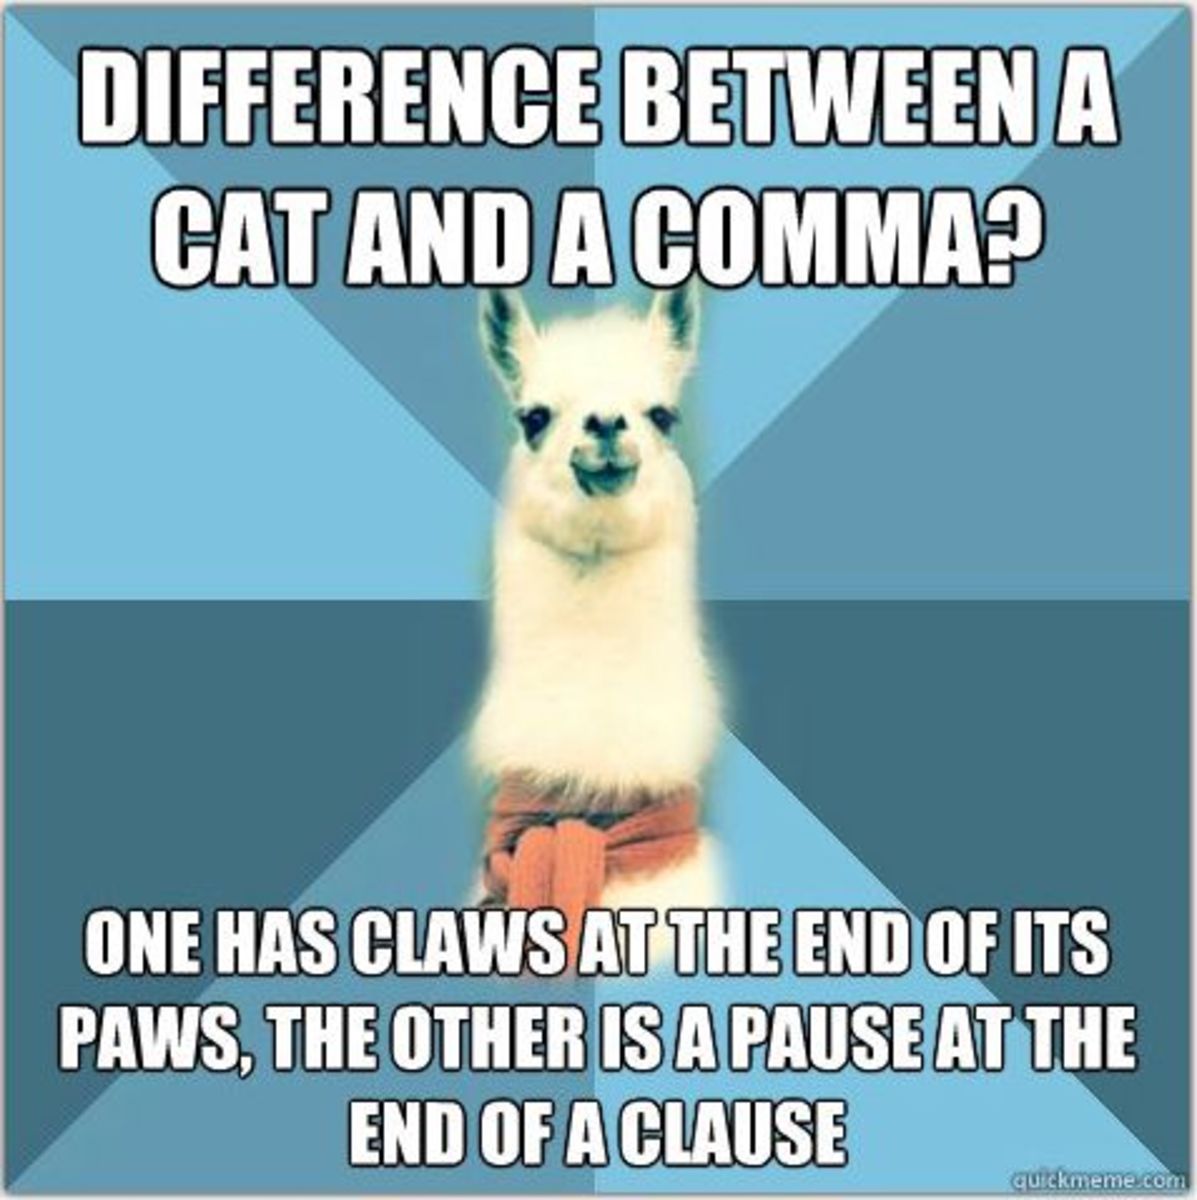 10 Comma Rules